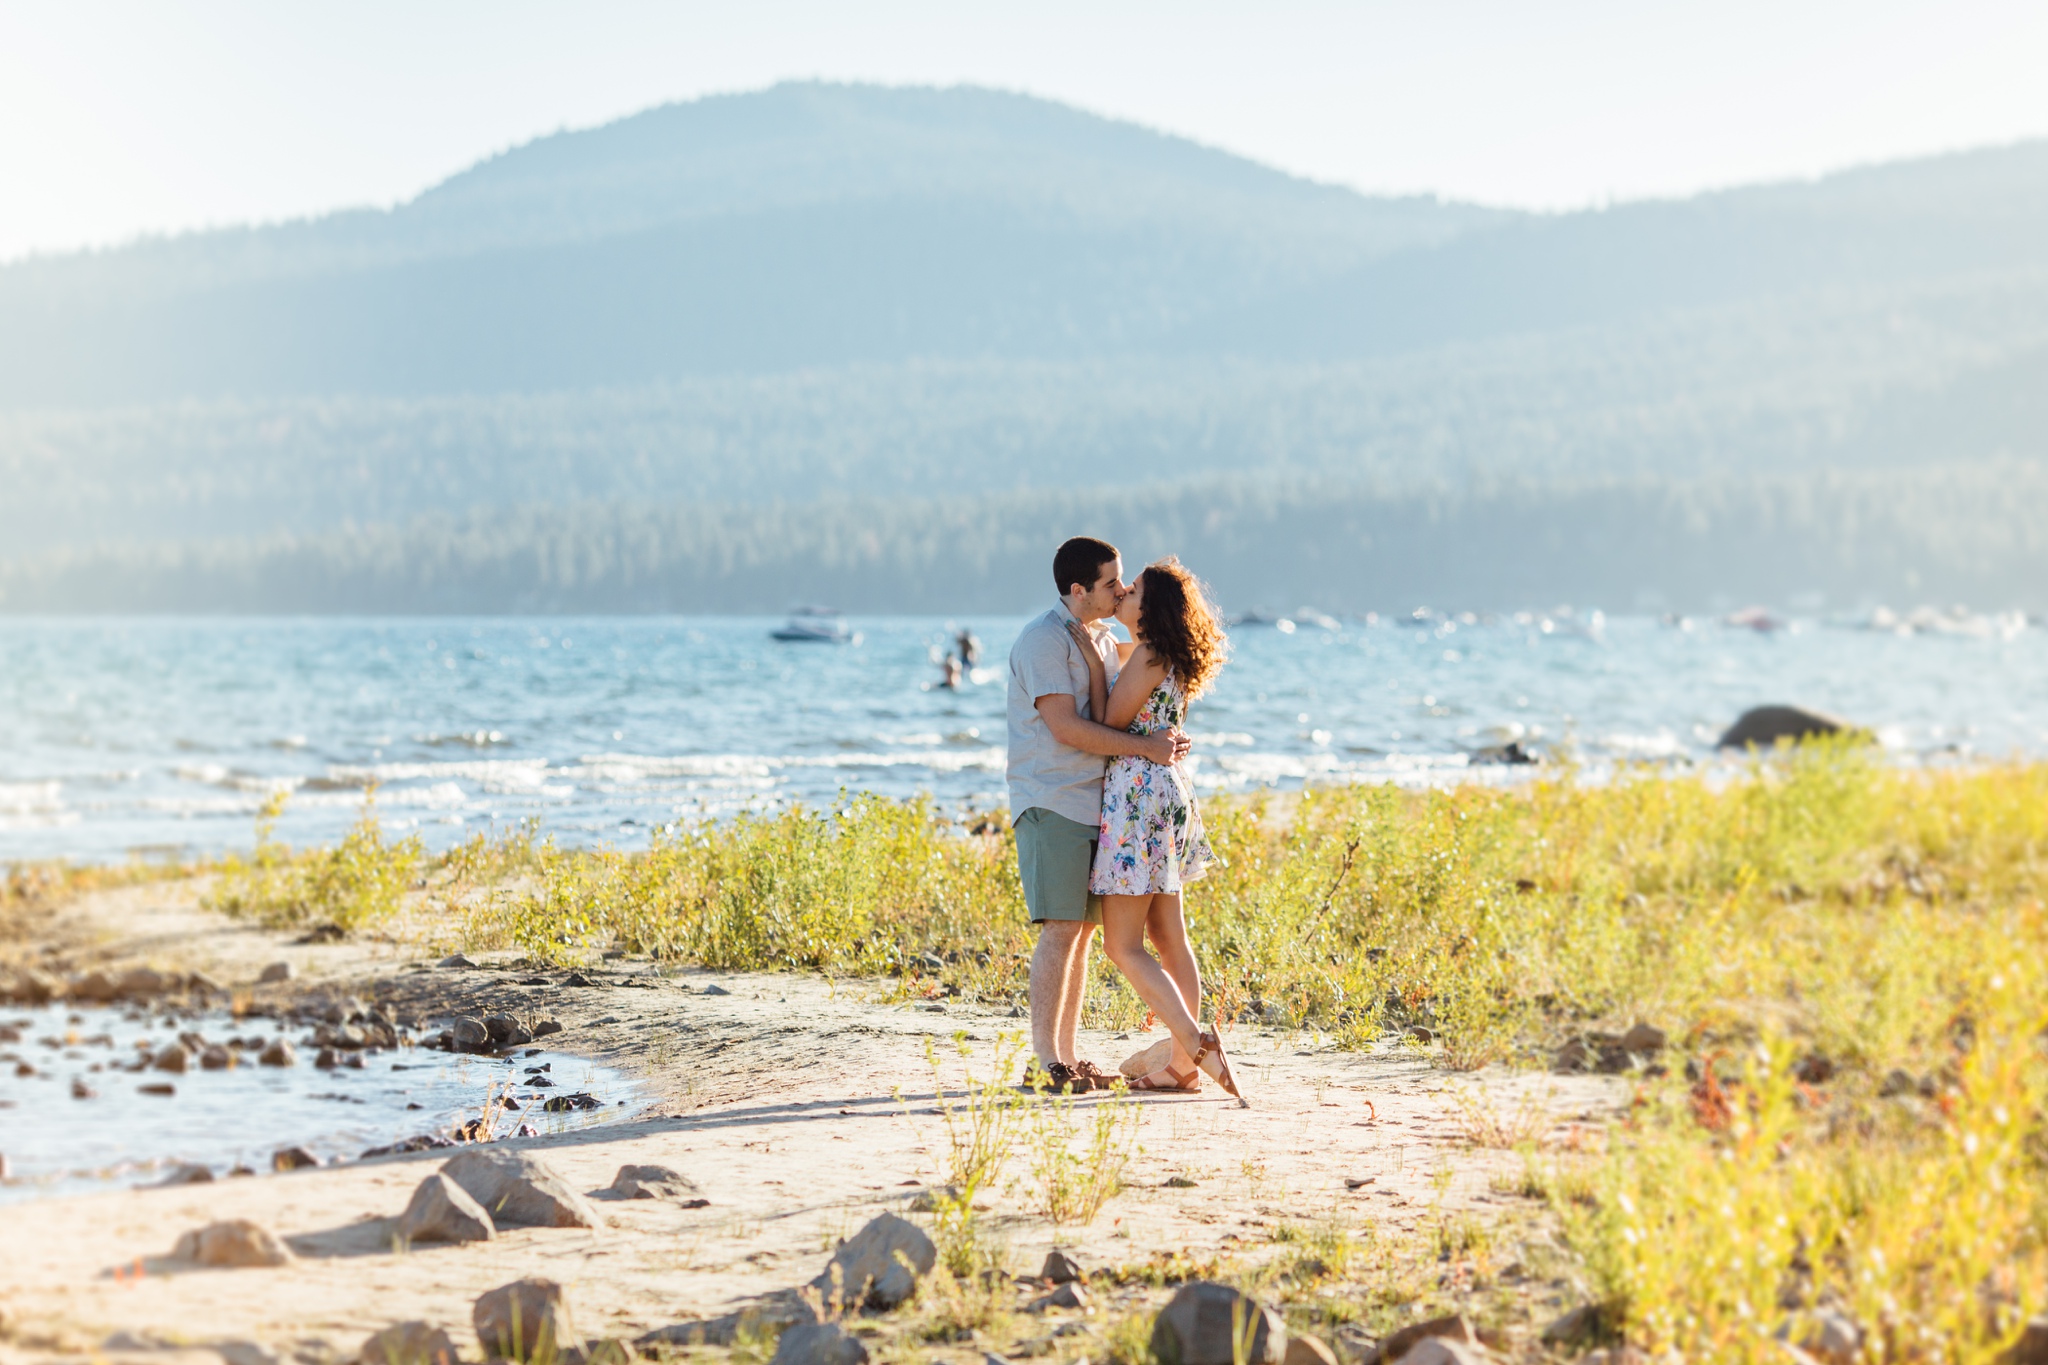 thedelauras_ostaraphotography_laketahoeengagement_laketahoeweddingphotograph_laketahoe_photographer_021